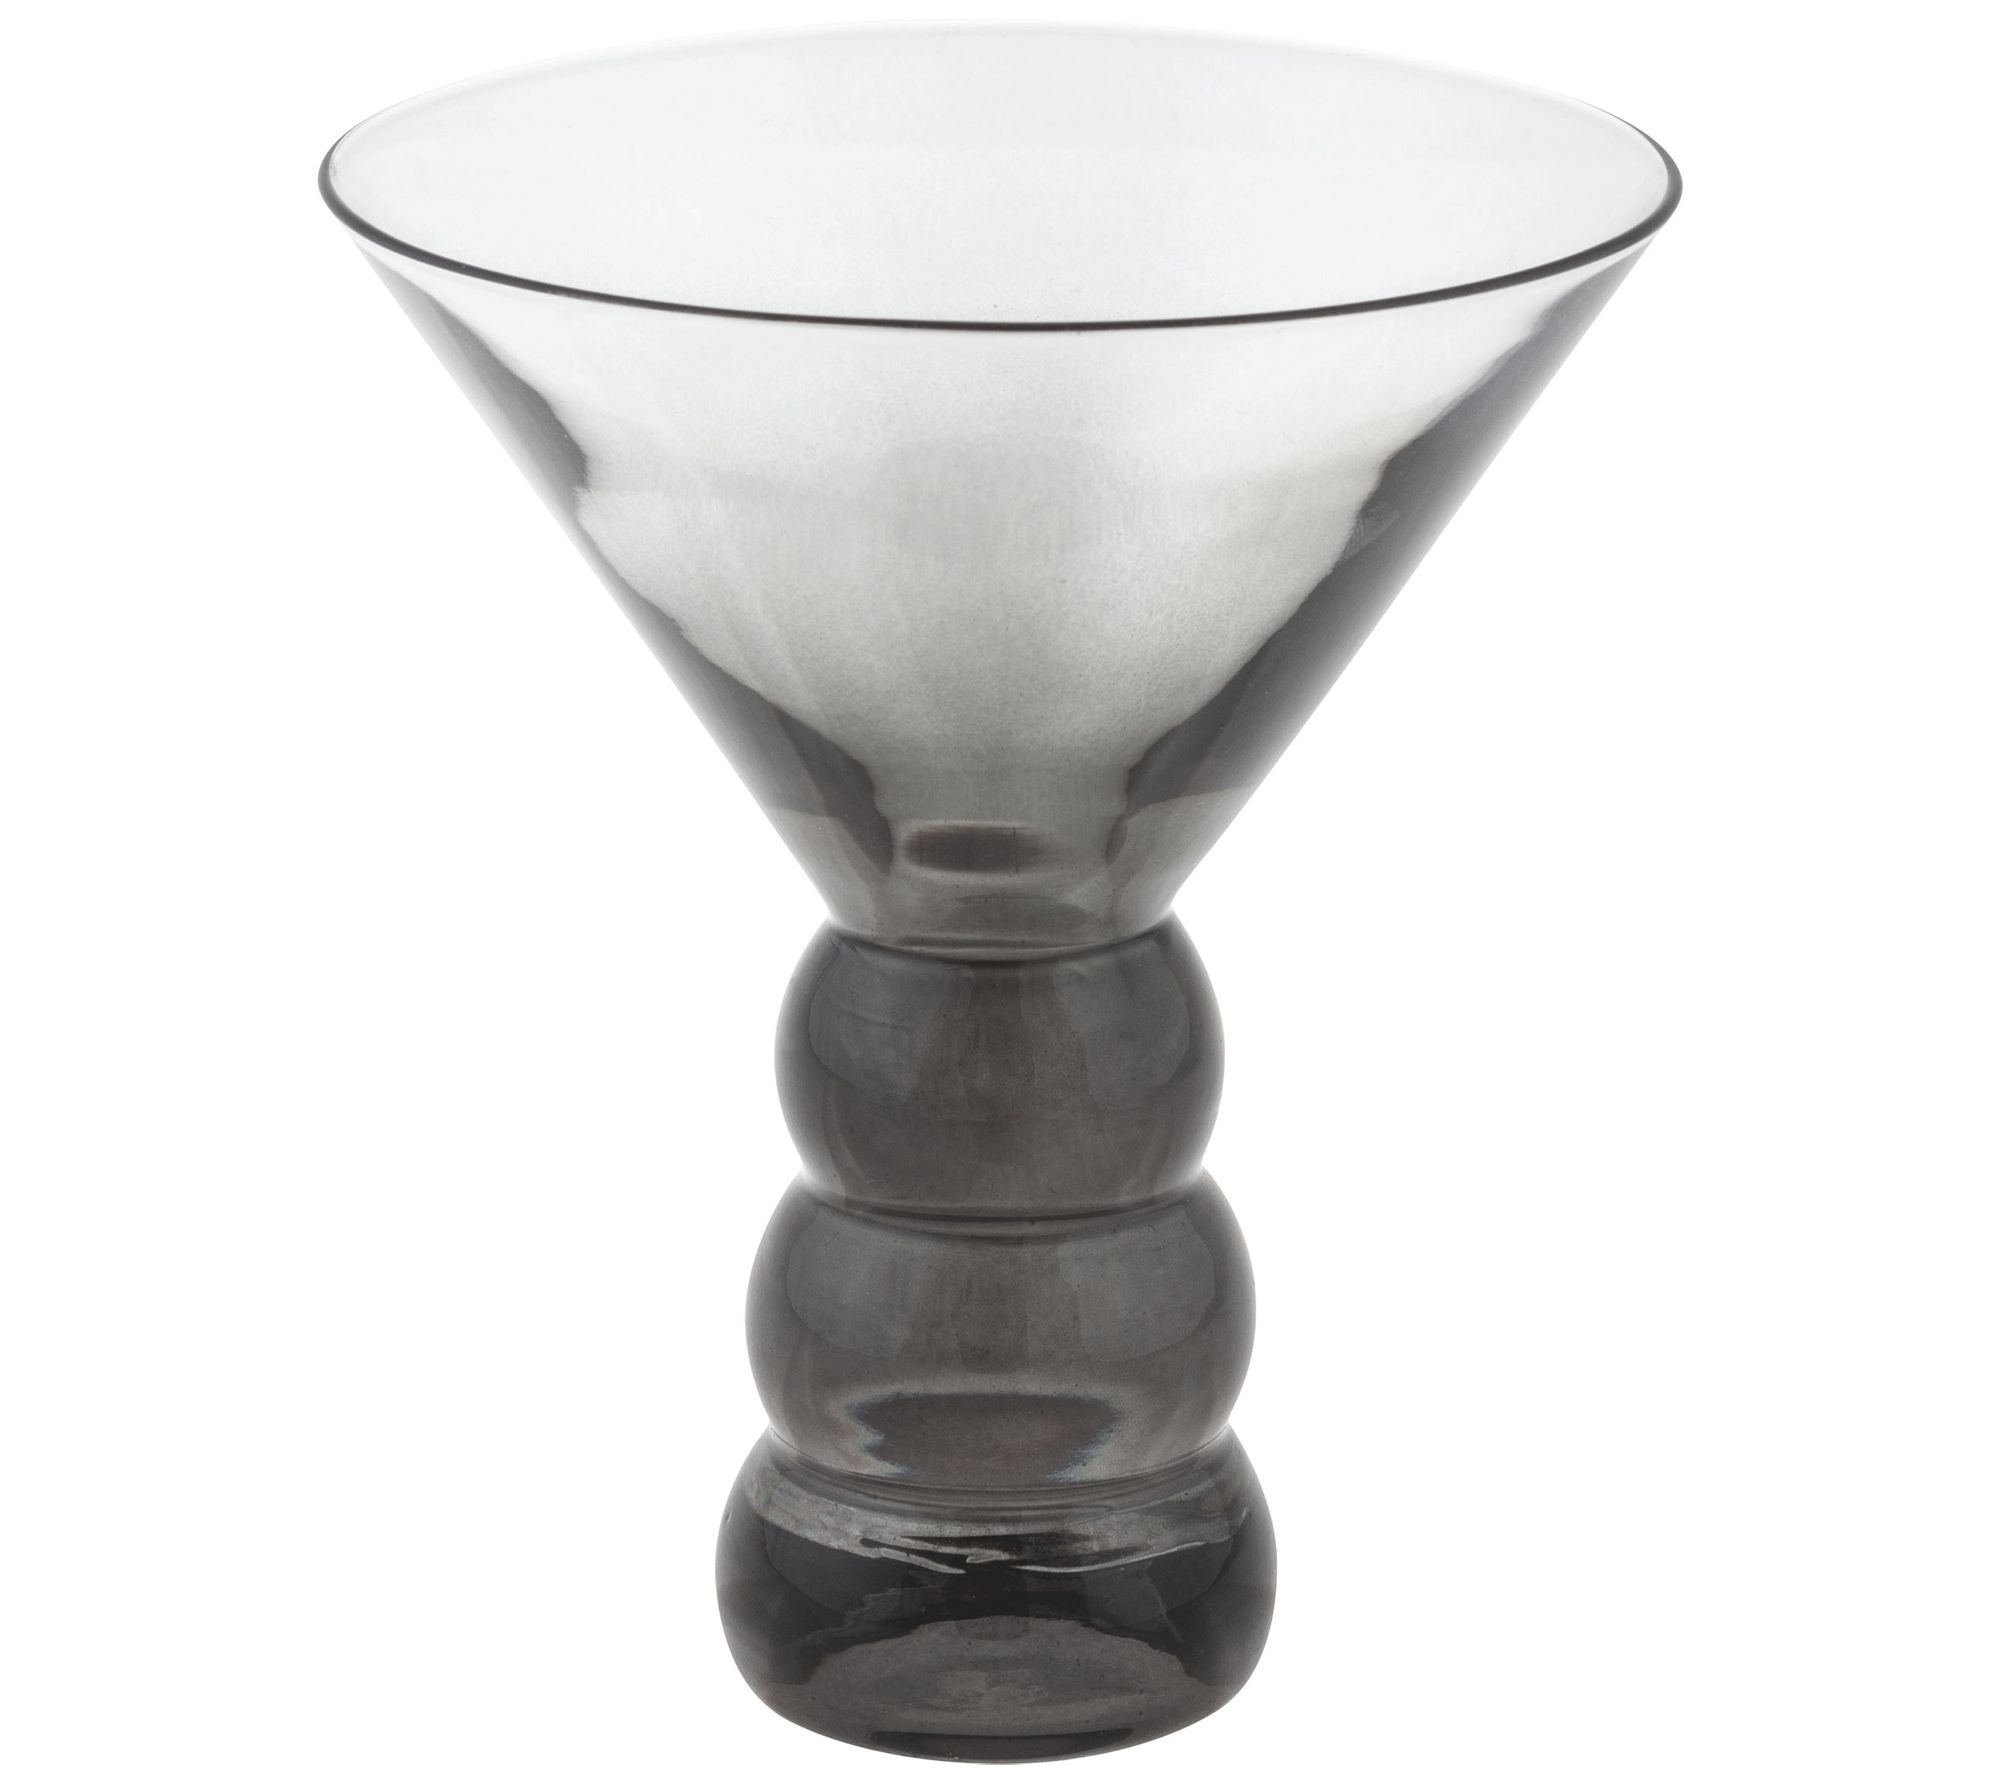 True North Insulated Martini Glass (Stainless Steel)